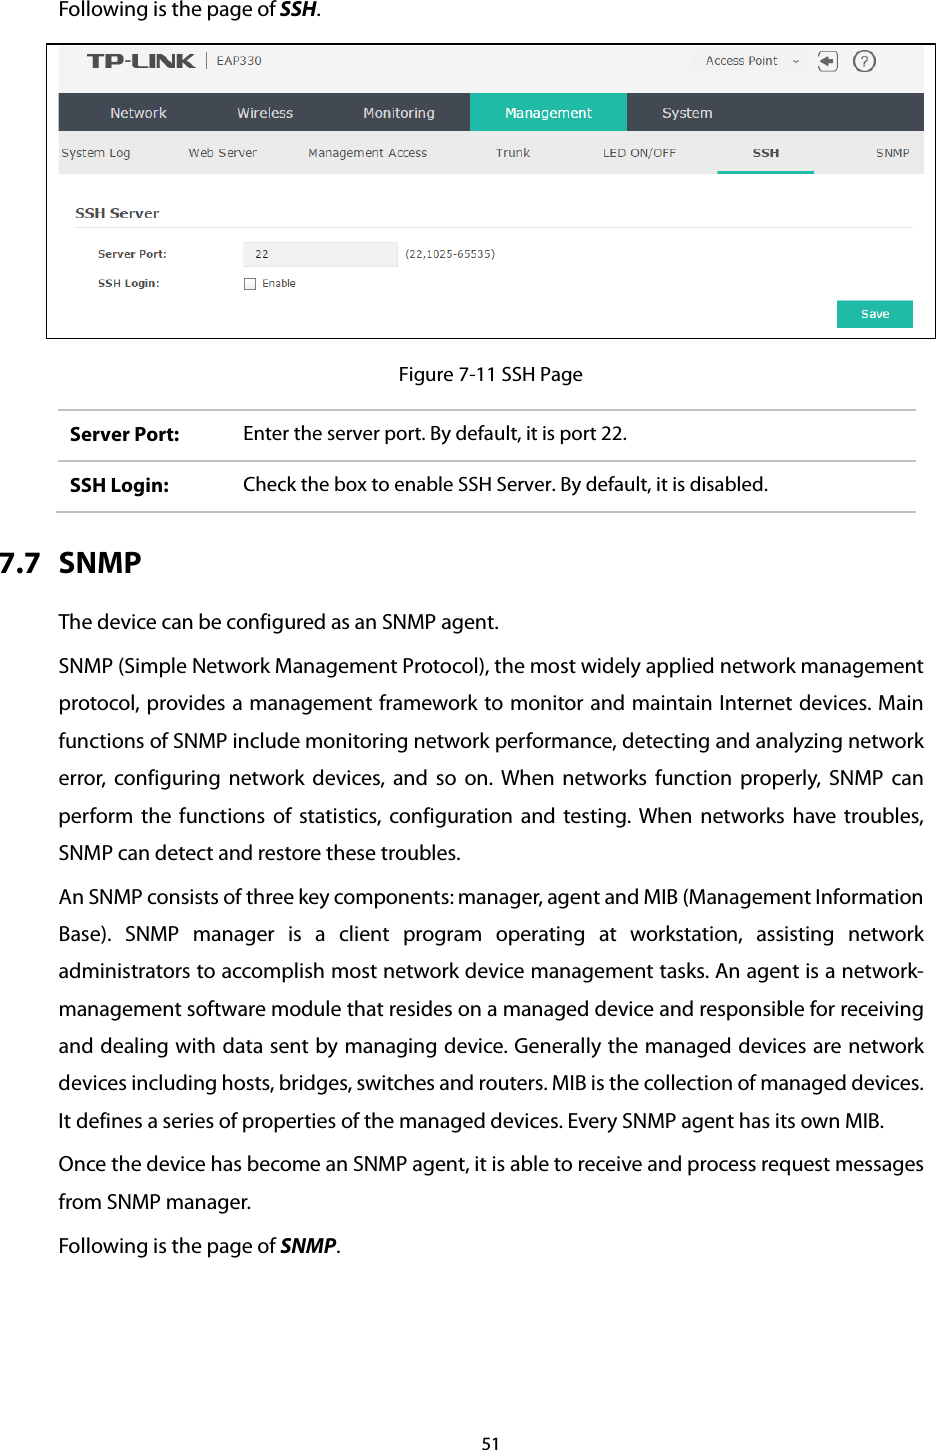 Following is the page of SSH.  Figure 7-11 SSH Page Server Port: Enter the server port. By default, it is port 22. SSH Login:  Check the box to enable SSH Server. By default, it is disabled. 7.7 SNMP The device can be configured as an SNMP agent. SNMP (Simple Network Management Protocol), the most widely applied network management protocol, provides a management framework to monitor and maintain Internet devices. Main functions of SNMP include monitoring network performance, detecting and analyzing network error, configuring network devices, and so on. When networks function properly, SNMP can perform the functions of statistics, configuration and testing. When networks have troubles, SNMP can detect and restore these troubles. An SNMP consists of three key components: manager, agent and MIB (Management Information Base). SNMP manager is a client program operating at workstation, assisting network administrators to accomplish most network device management tasks. An agent is a network-management software module that resides on a managed device and responsible for receiving and dealing with data sent by managing device. Generally the managed devices are network devices including hosts, bridges, switches and routers. MIB is the collection of managed devices. It defines a series of properties of the managed devices. Every SNMP agent has its own MIB. Once the device has become an SNMP agent, it is able to receive and process request messages from SNMP manager. Following is the page of SNMP. 51  